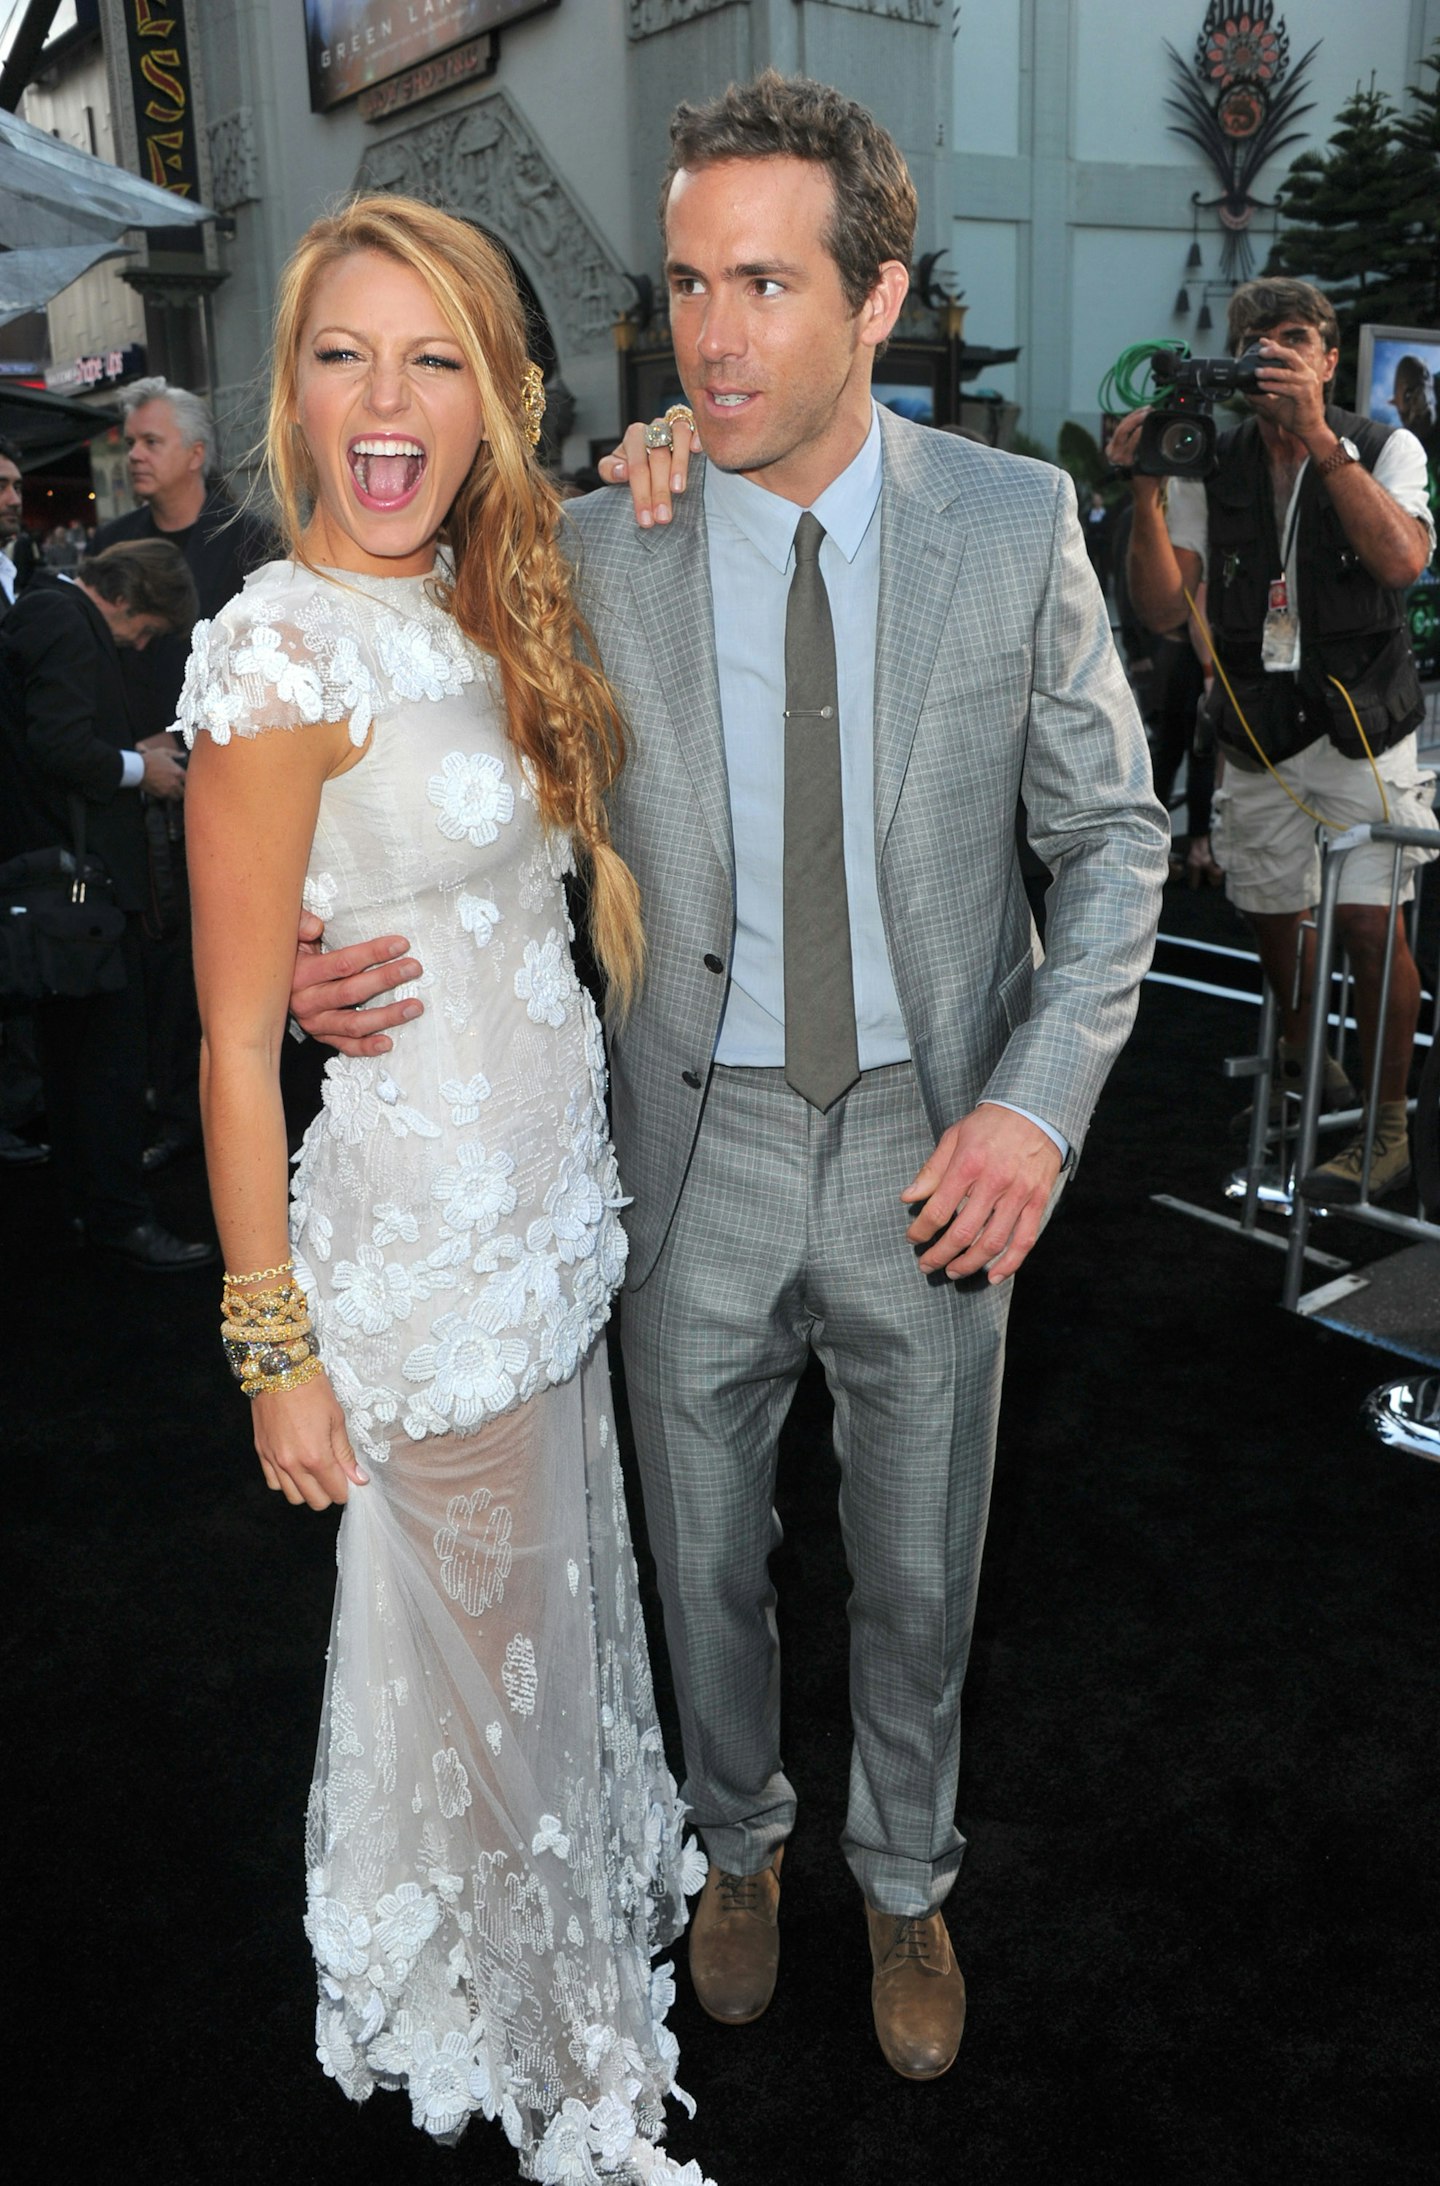 Actors Blake Lively (L) and Ryan Reynolds arrive at the premiere of Warner Bros. Pictures' "Green Lantern" held at Grauman's Chinese Theatre on June 15, 2011 in Hollywood, California.